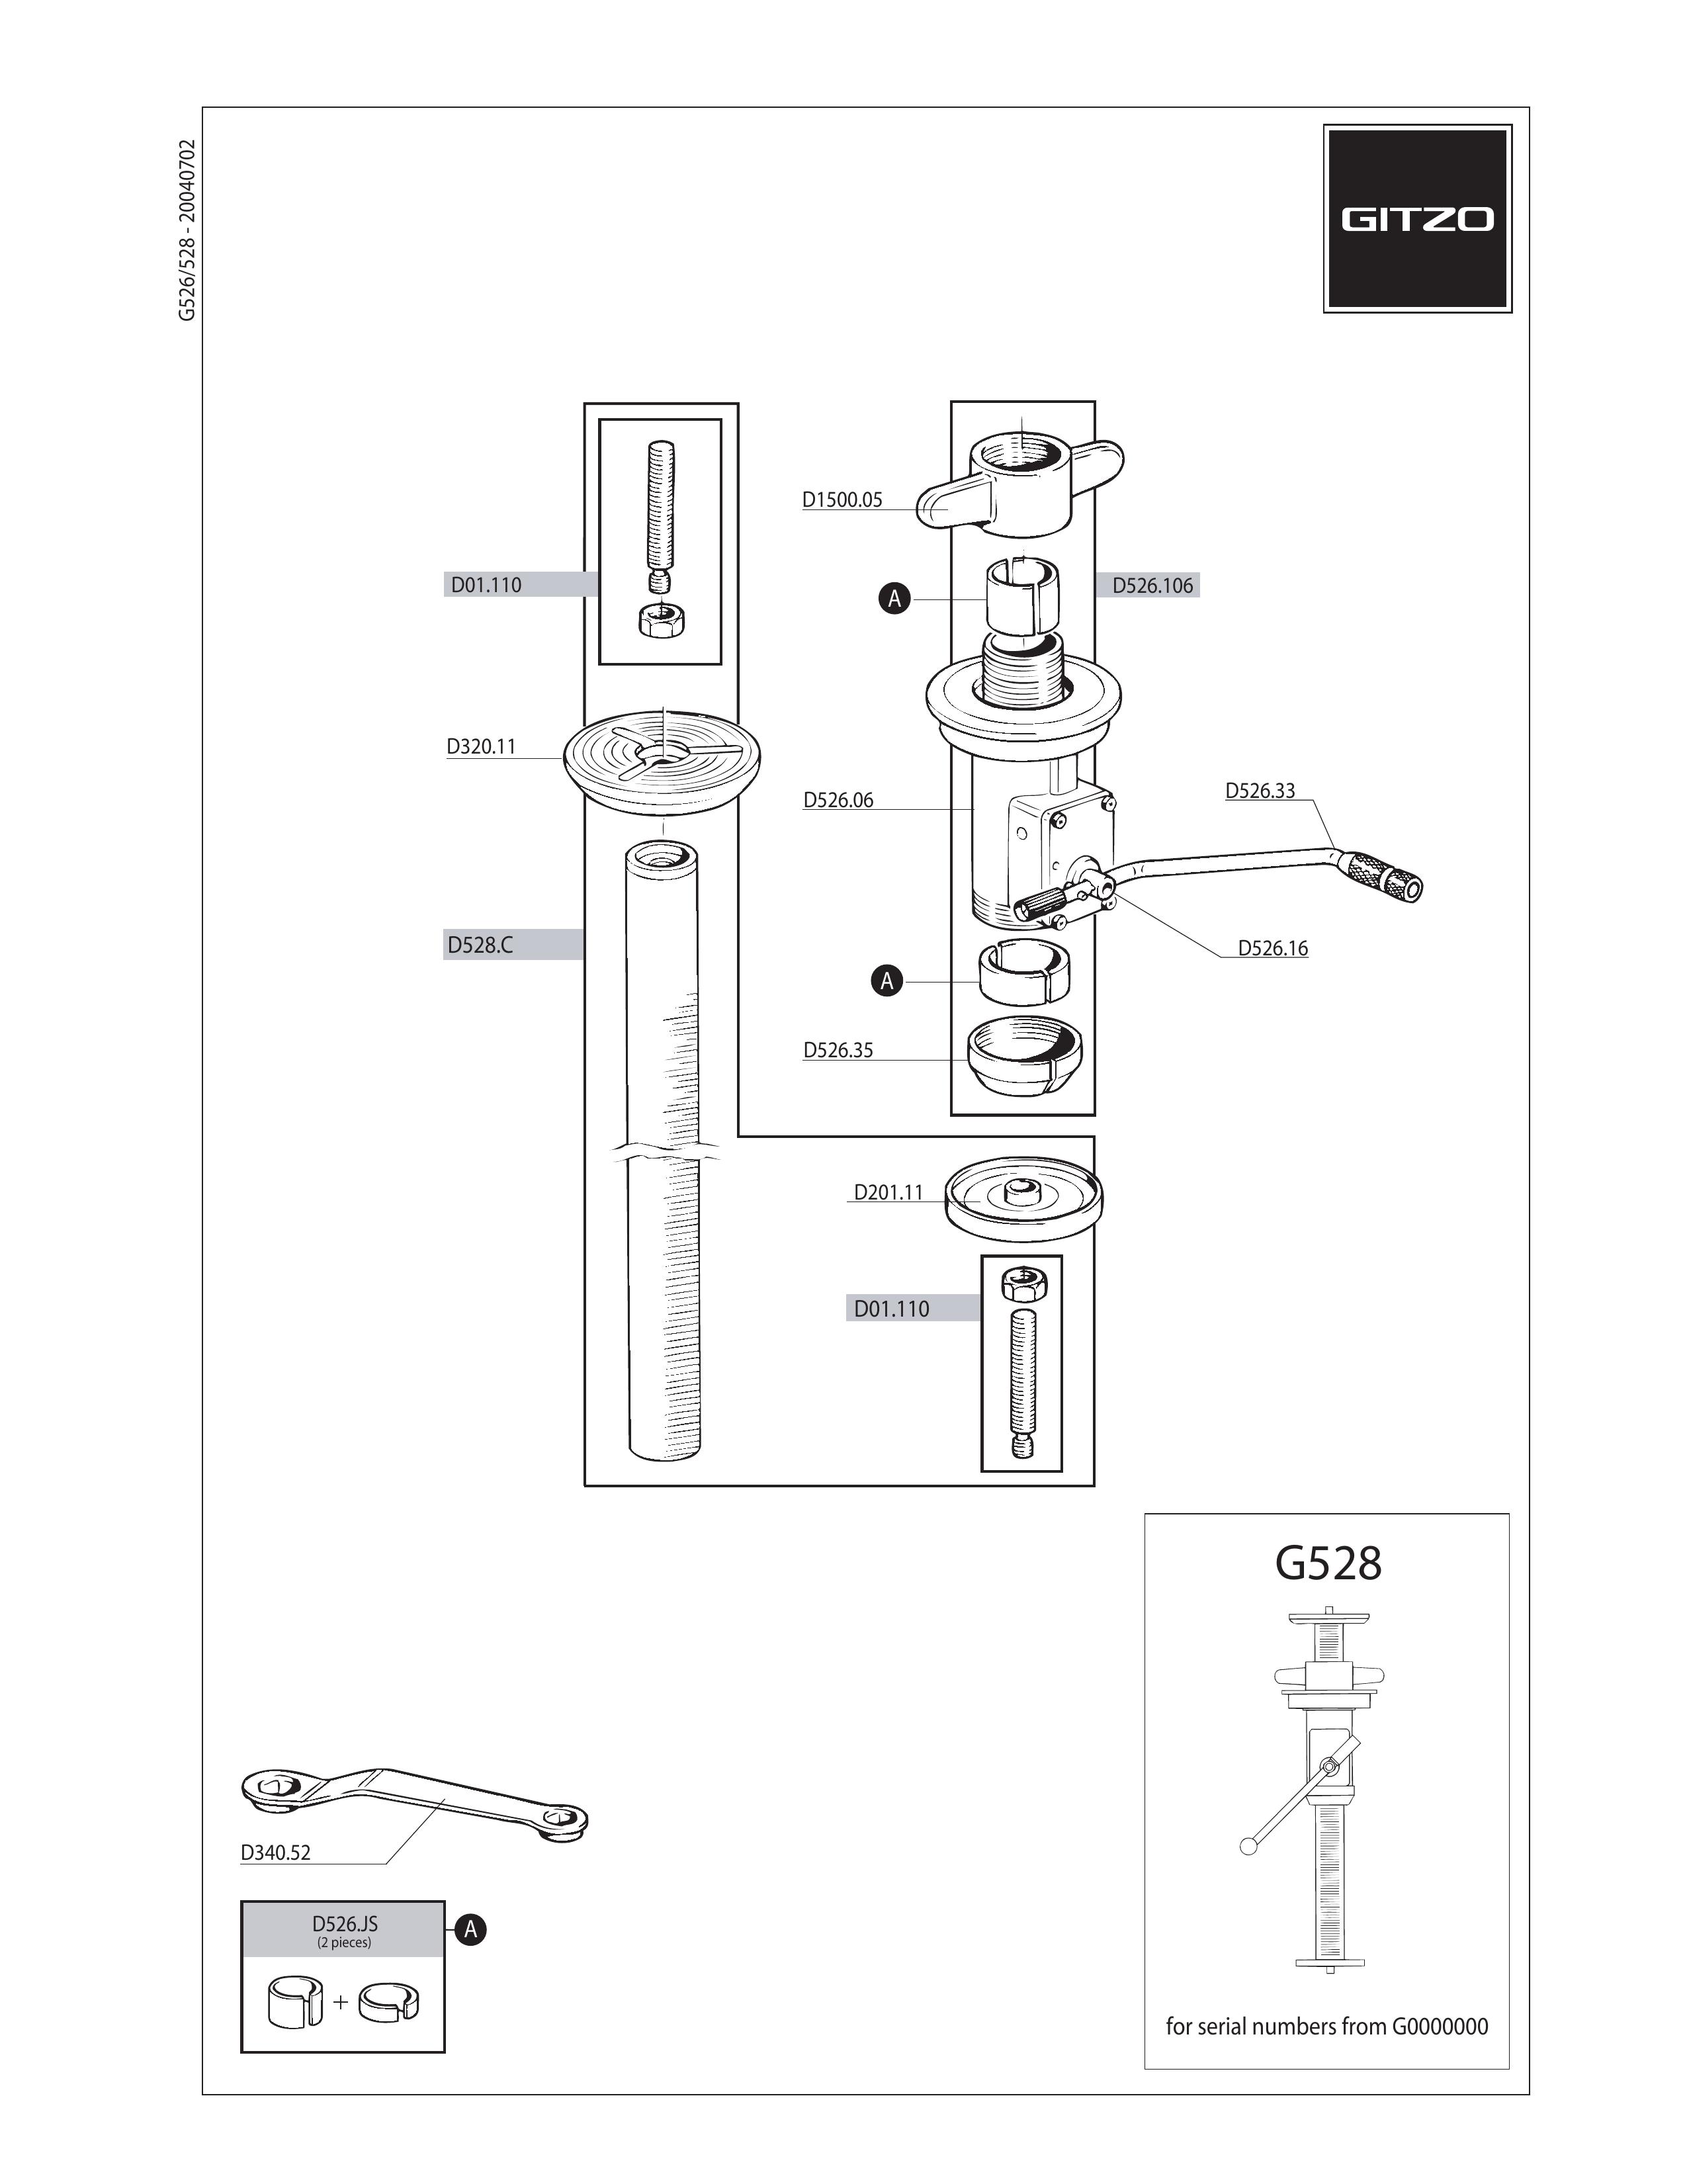 Gitzo G528 Camcorder Accessories User Manual